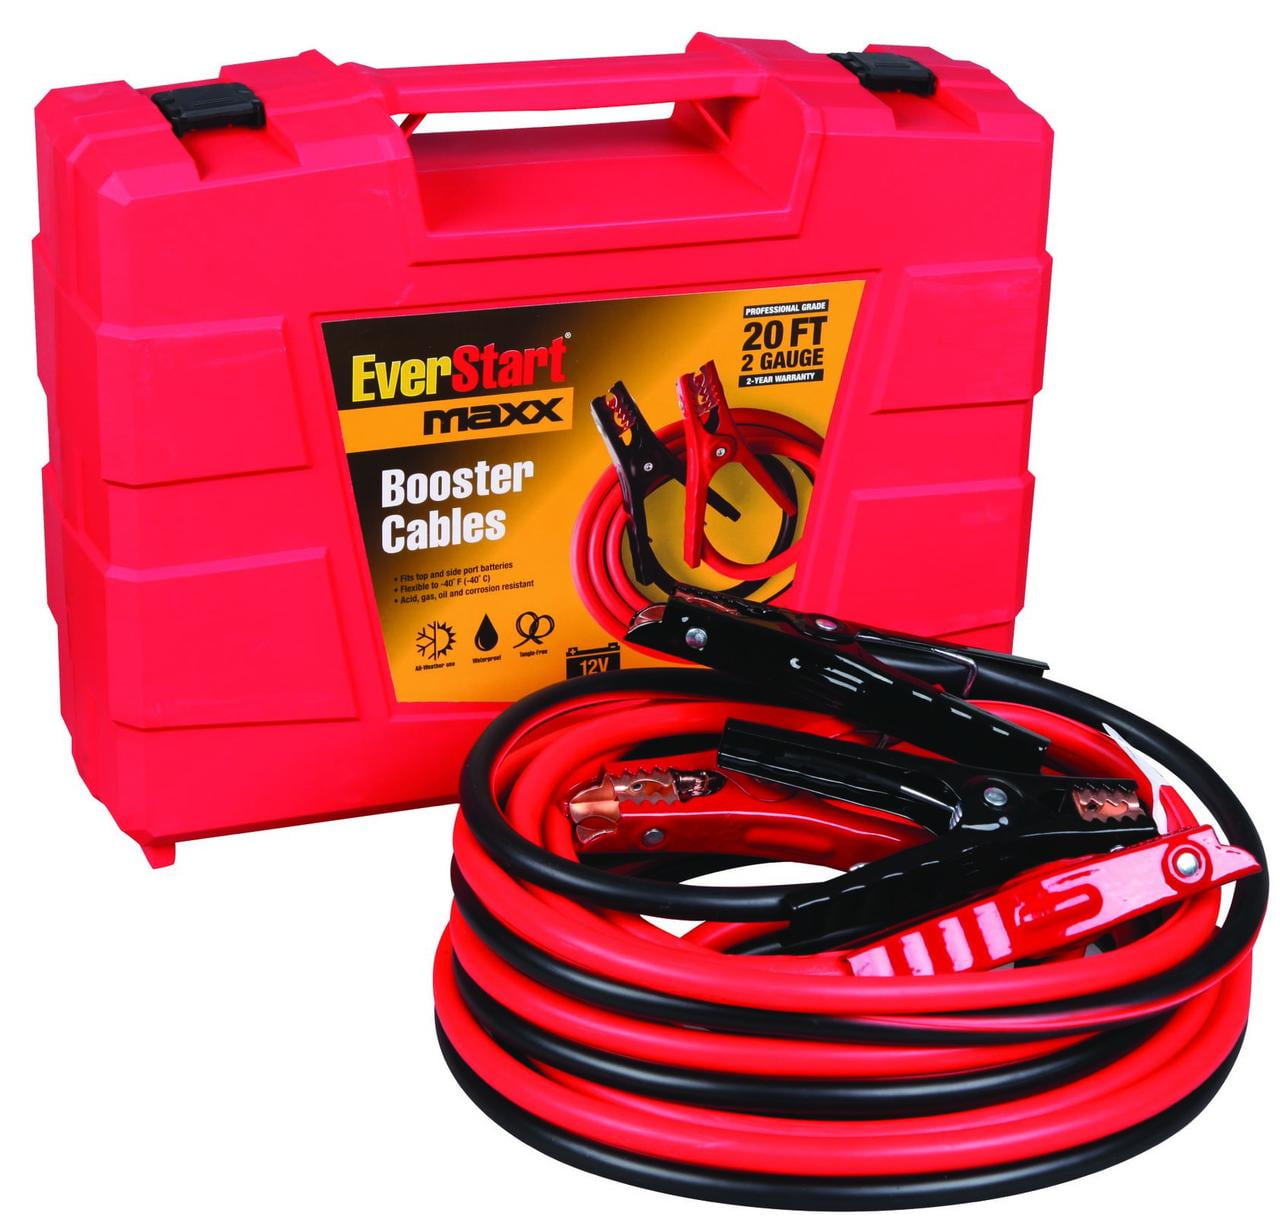 Emergency Power Battery Jumper 20FT 2gauge Booster Jumper Cables Red and Black 